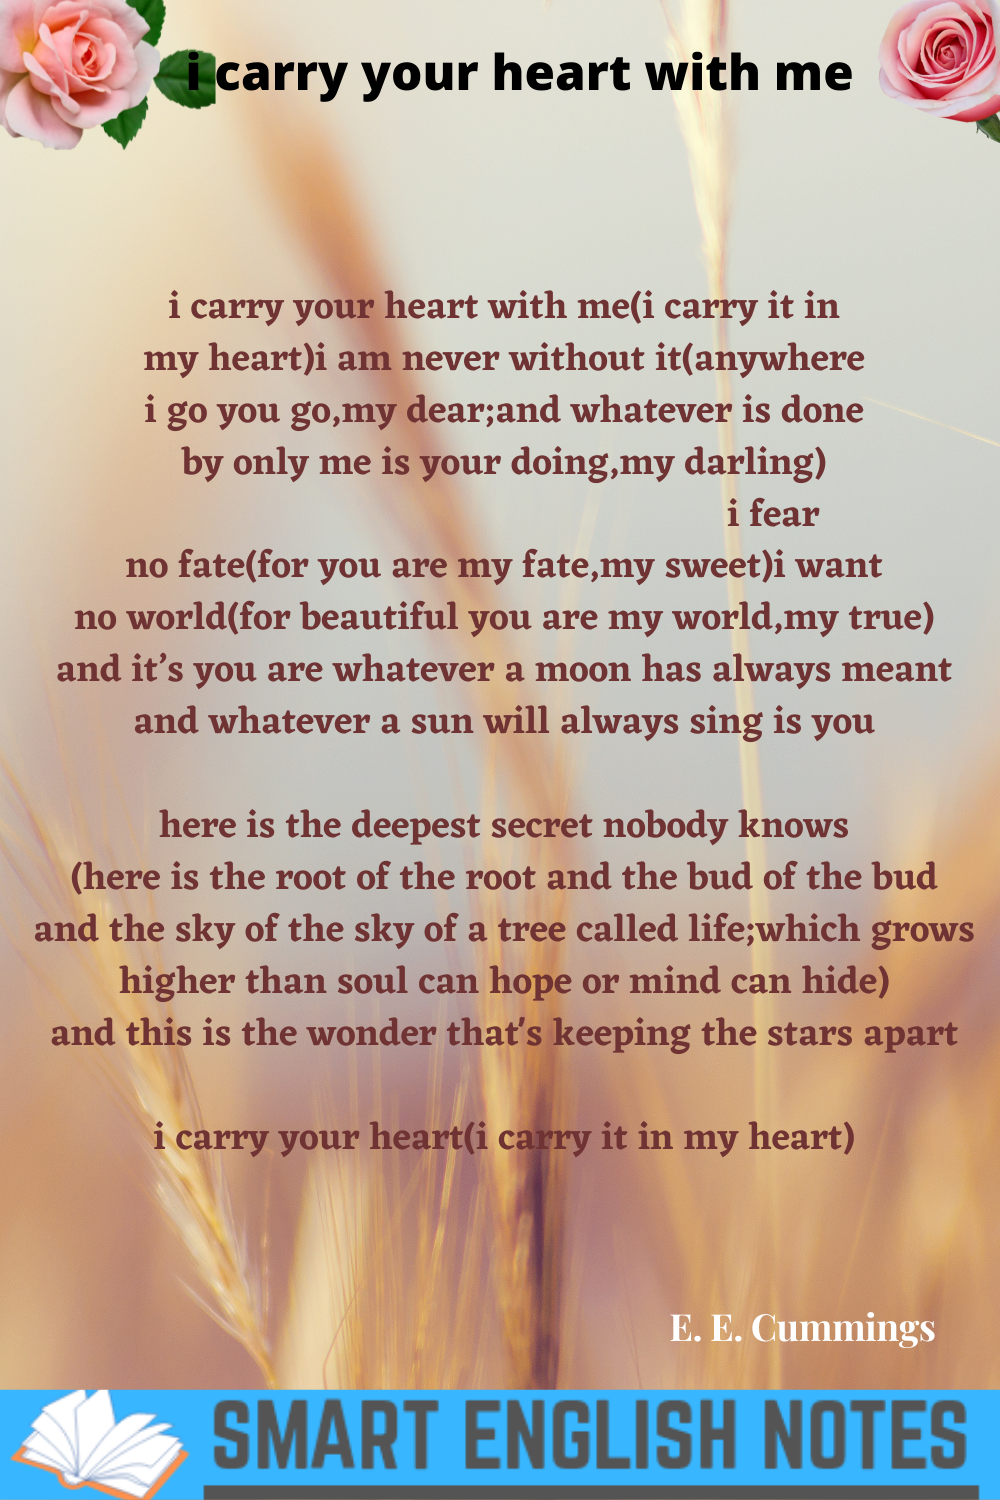 I Carry Your Heart With Me Summary

